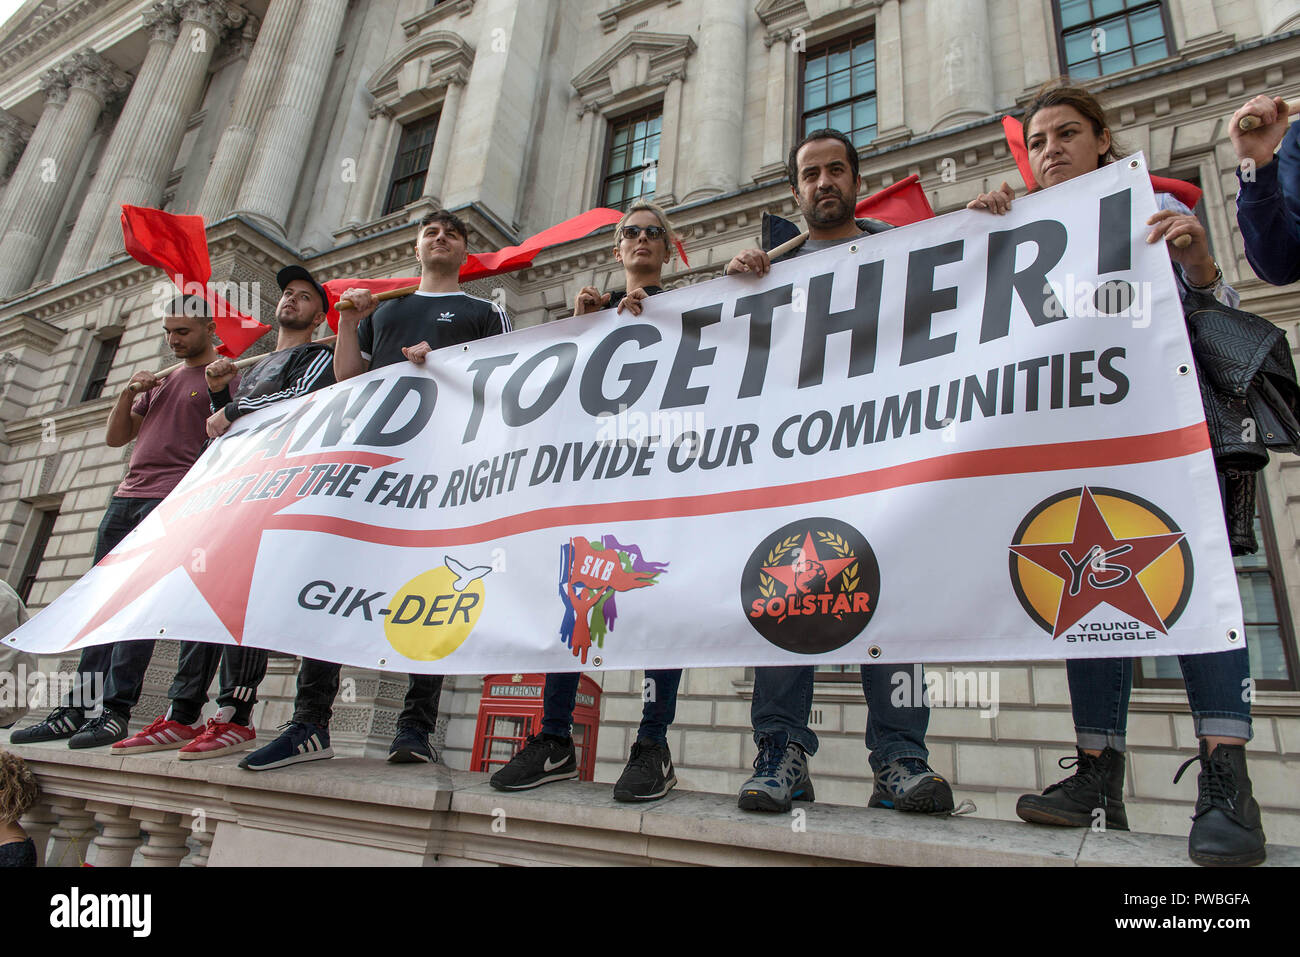 London, Greater London, UK. 13th Oct, 2018. Protesters seen holding a banner and flags at the antifascist demonstration against the DFLA in London.Counter demonstration organised by United Against Racism & Islamophobia, Trade Unions and Stand Up to Racism marched from Old Palace Yard to Whitehall in an attempt to block the route of Democratic Football Lads Alliance (DFLA) march in London. During the counter demonstration there were incidents where DFLA supporters attempted to get close to the anti-racist protesters, that were controlled by the police. (Credit Image: © Andres P Stock Photo